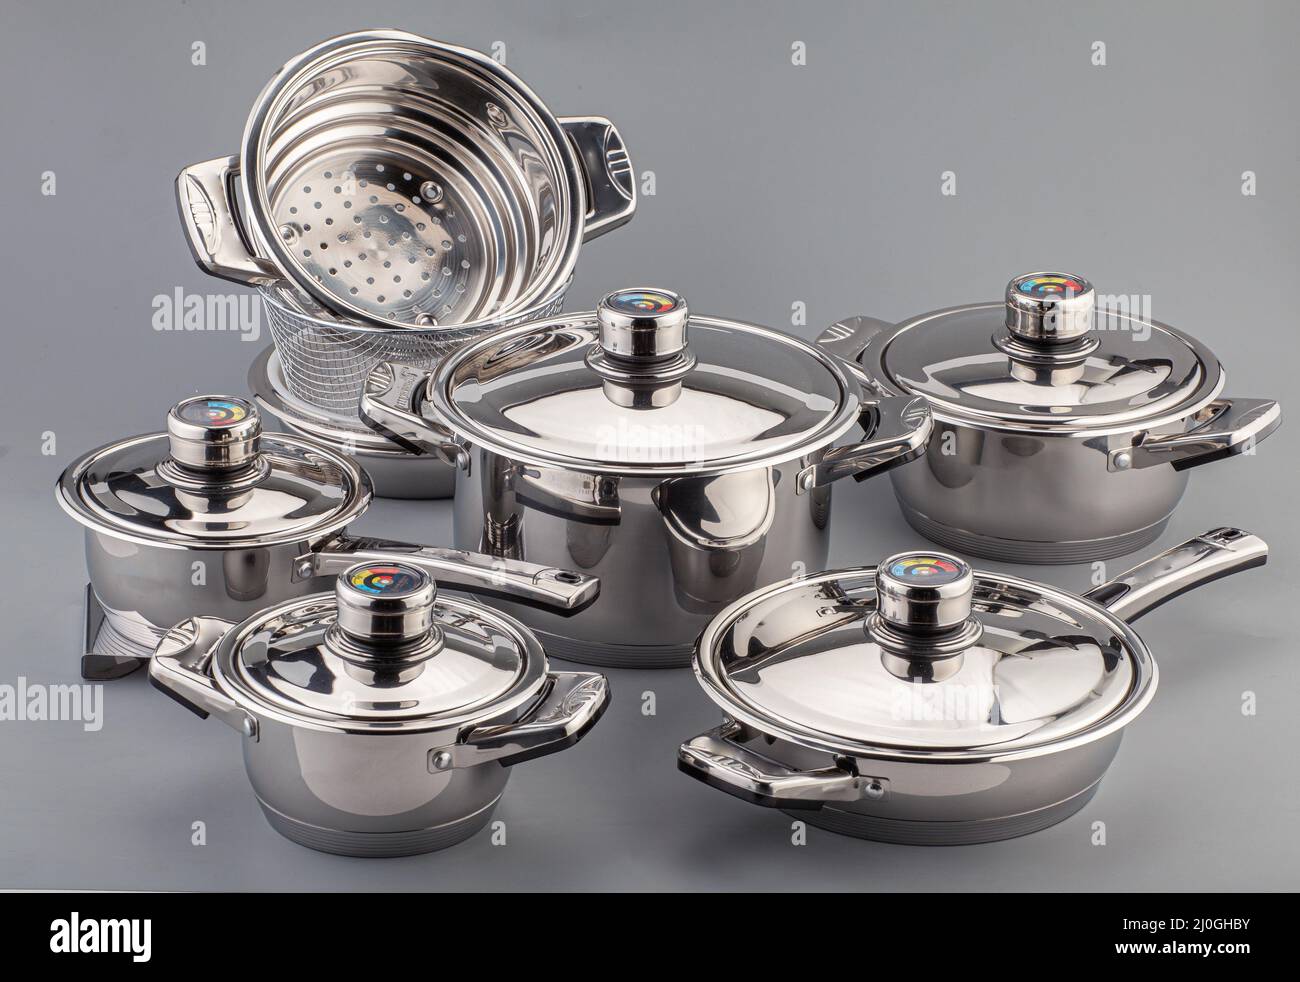 https://c8.alamy.com/comp/2J0GHBY/stainless-steel-cookware-pots-and-pans-on-gray-background-kitchenware-set-utensils-2J0GHBY.jpg